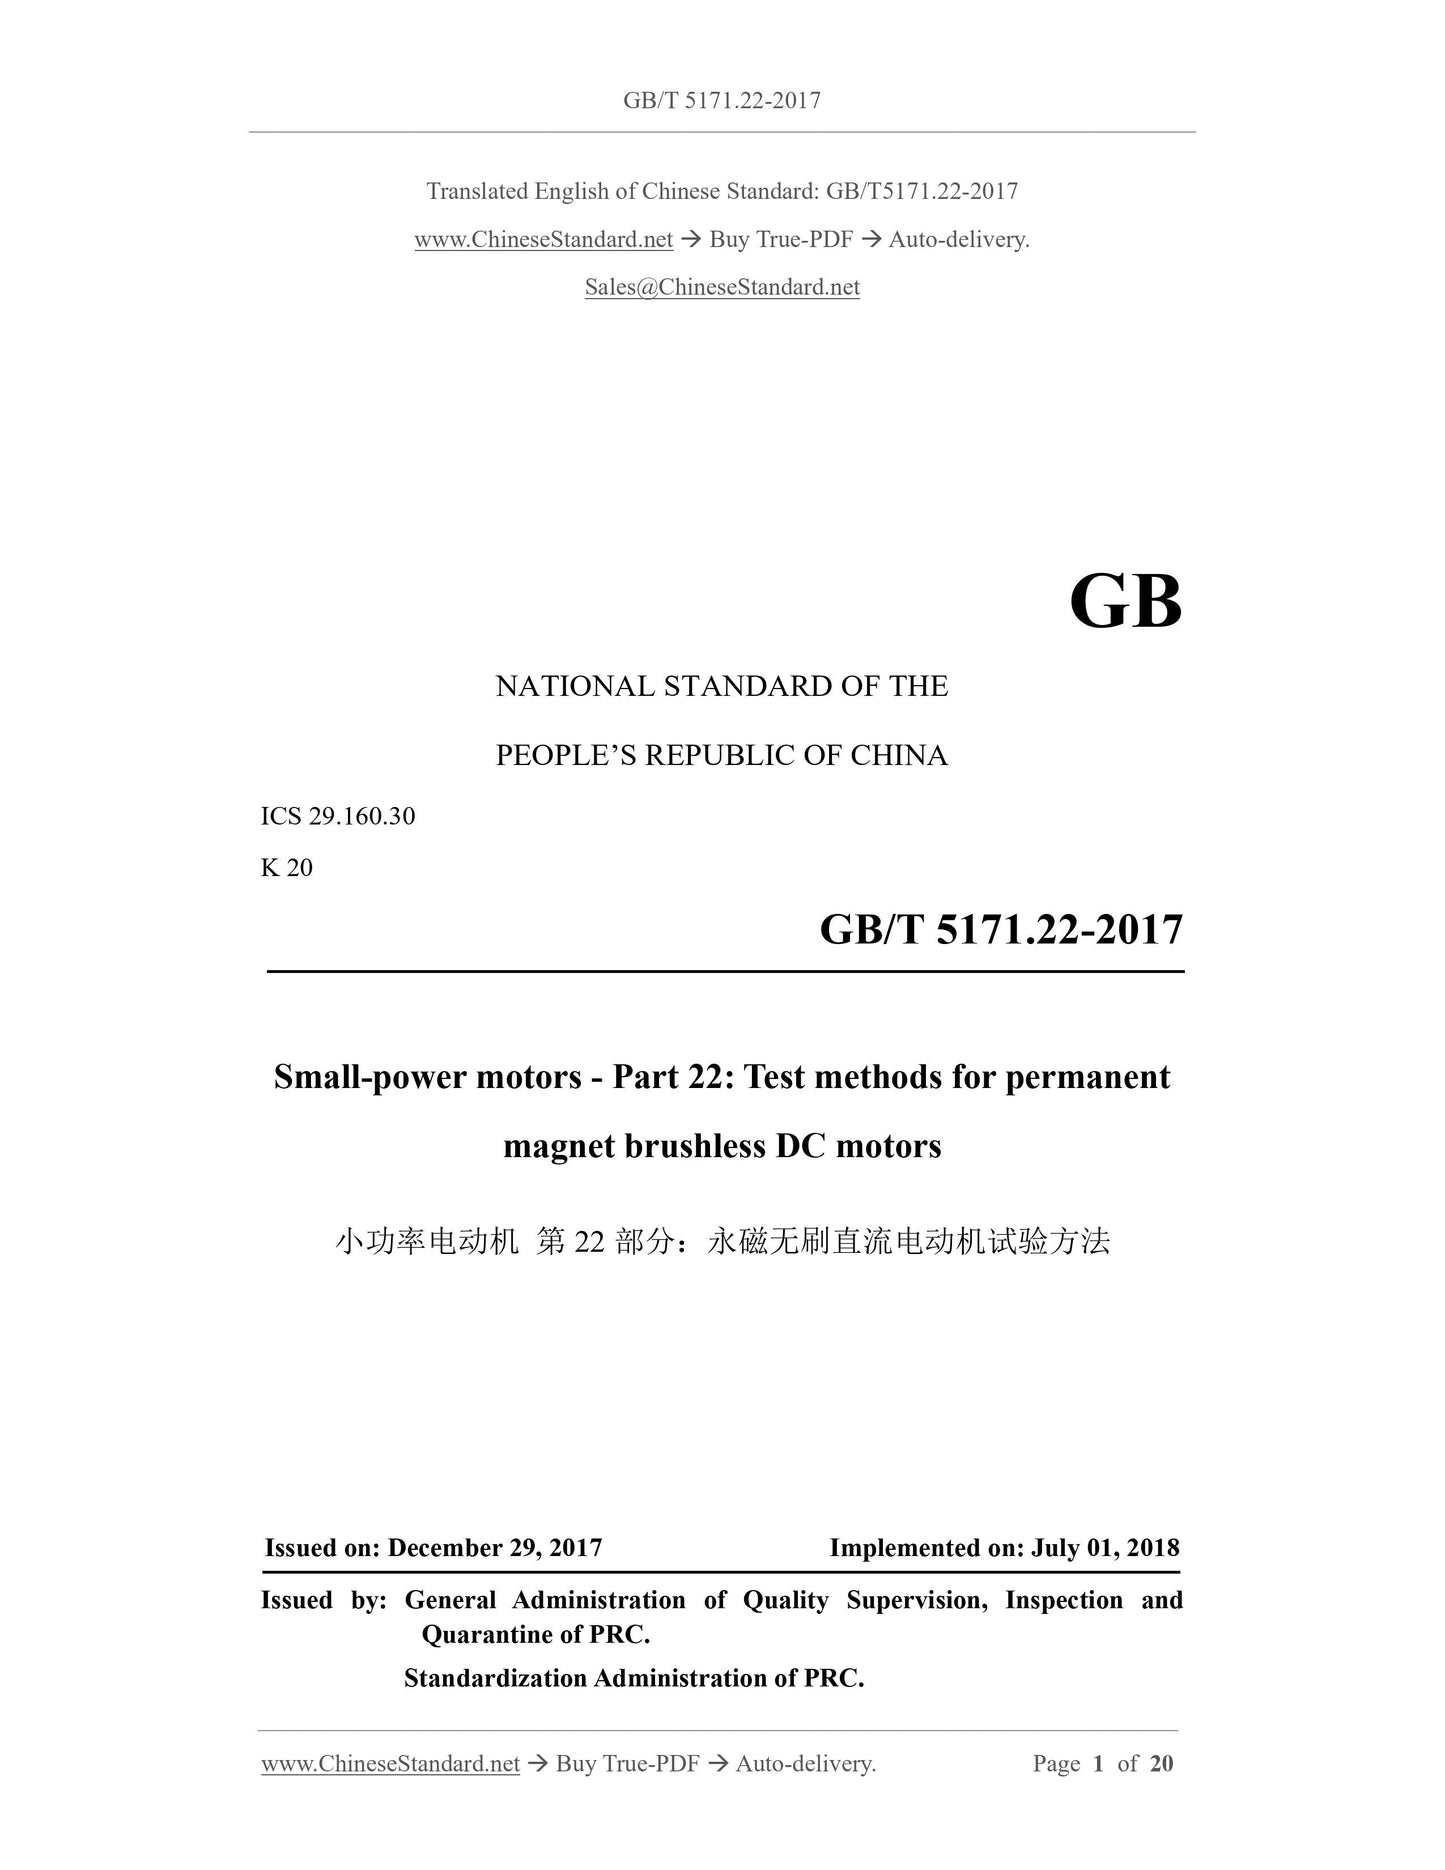 GB/T 5171.22-2017 Page 1